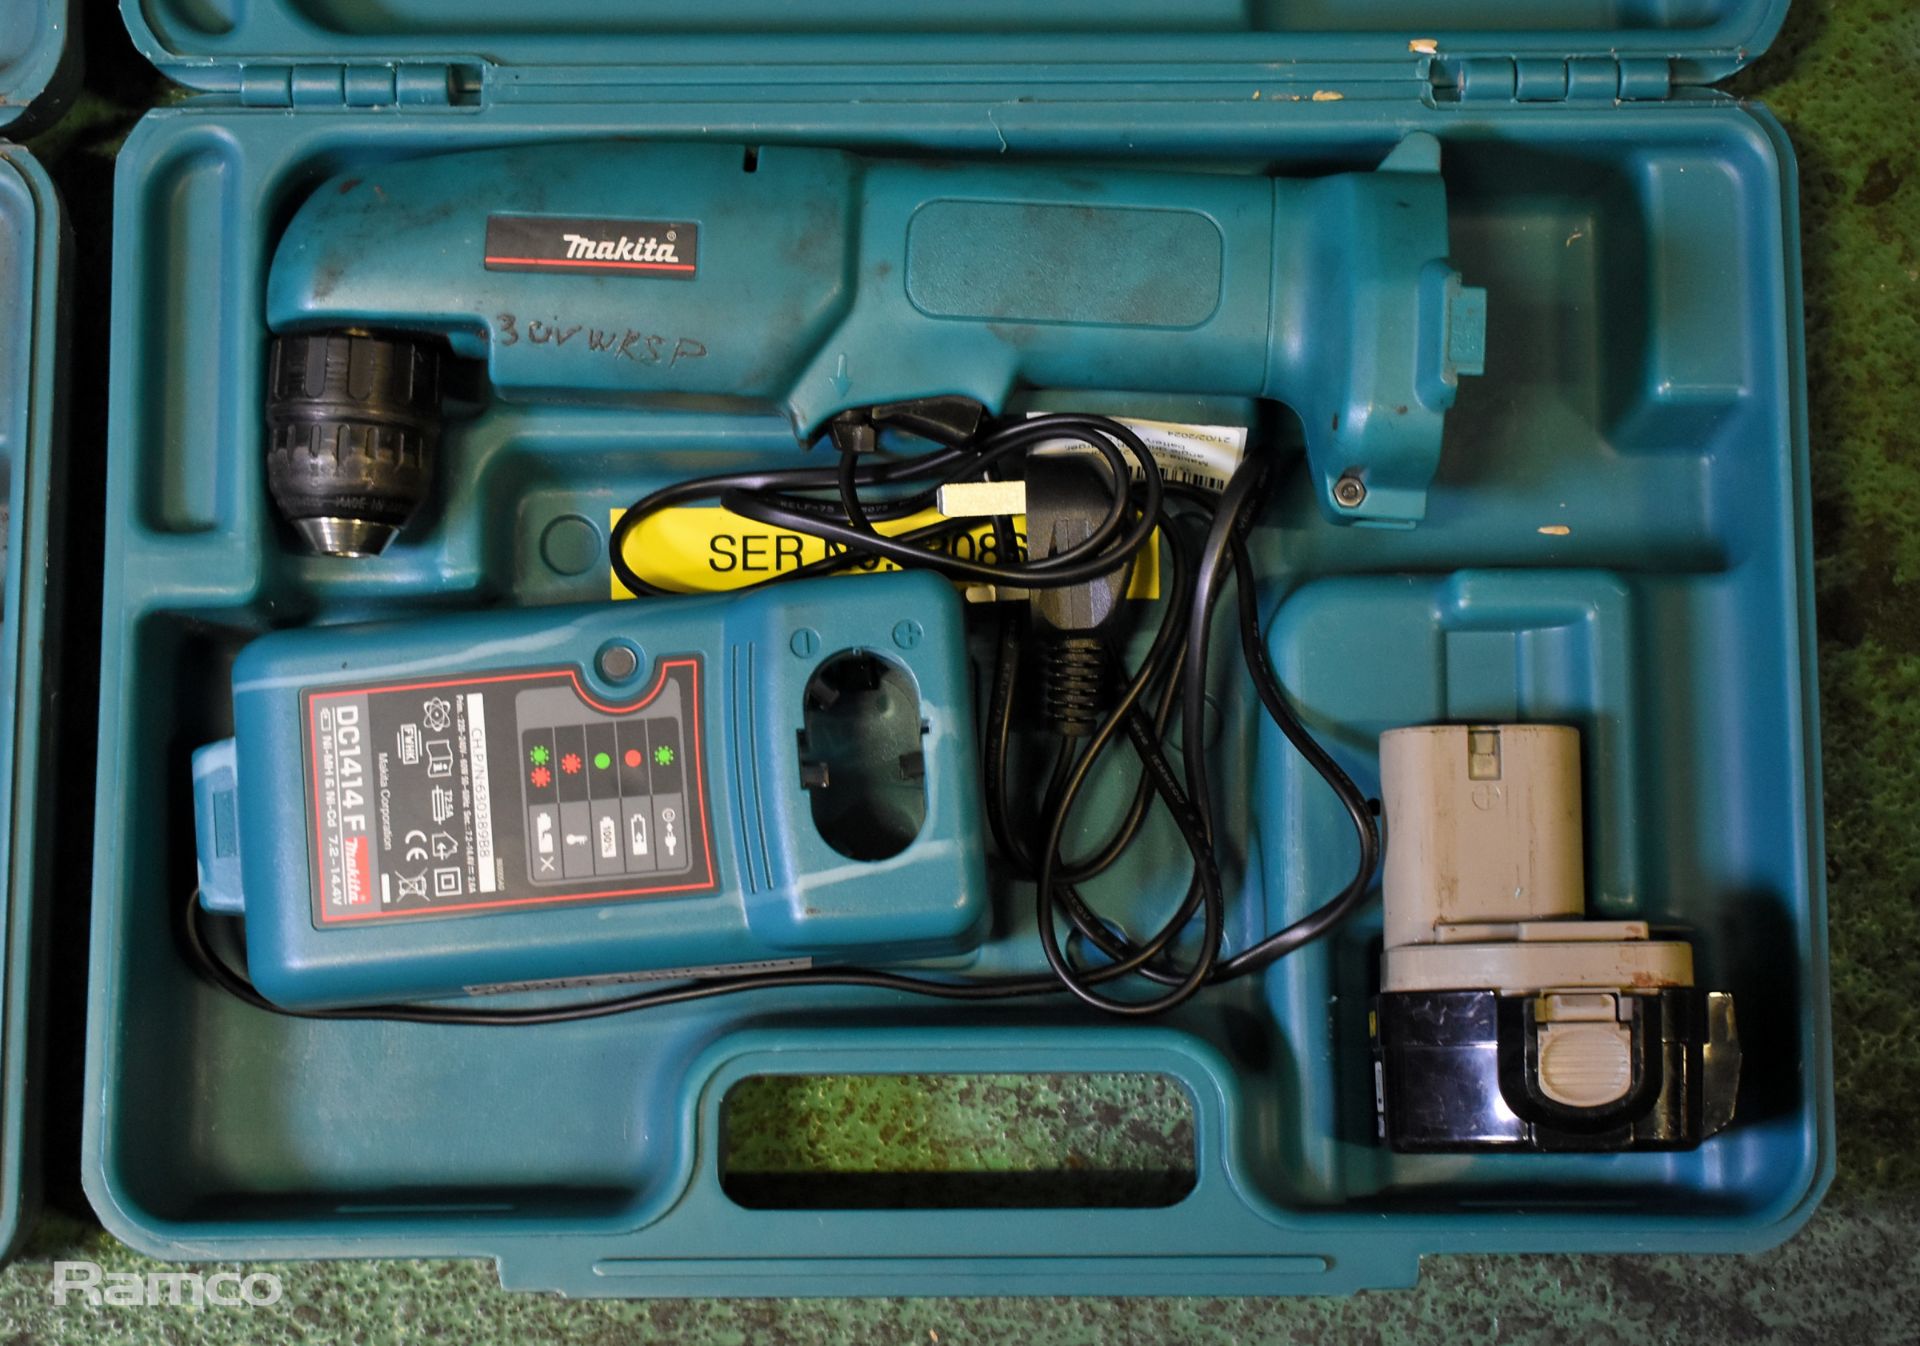 2x Makita DA312D cordless angle drill with charger, battery and case - Image 6 of 9